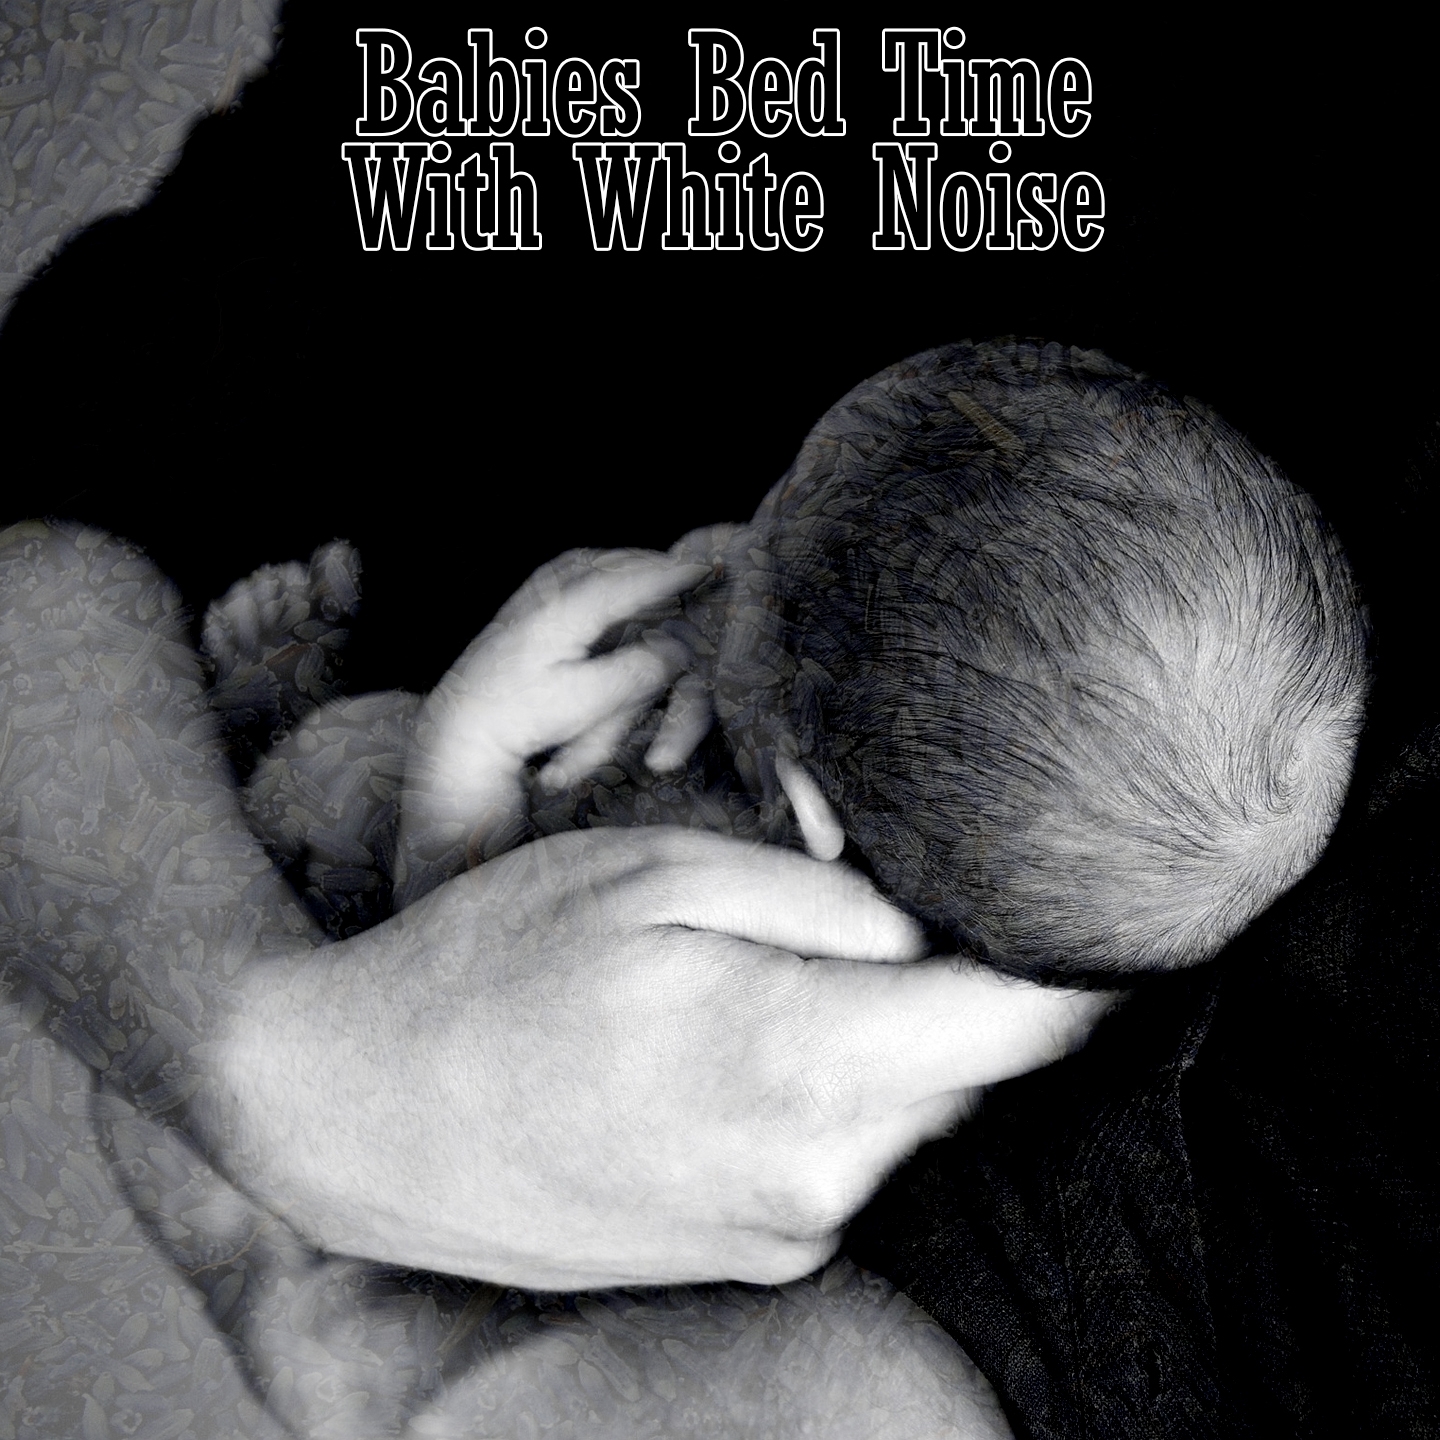 Babies Bed Time With White Noise